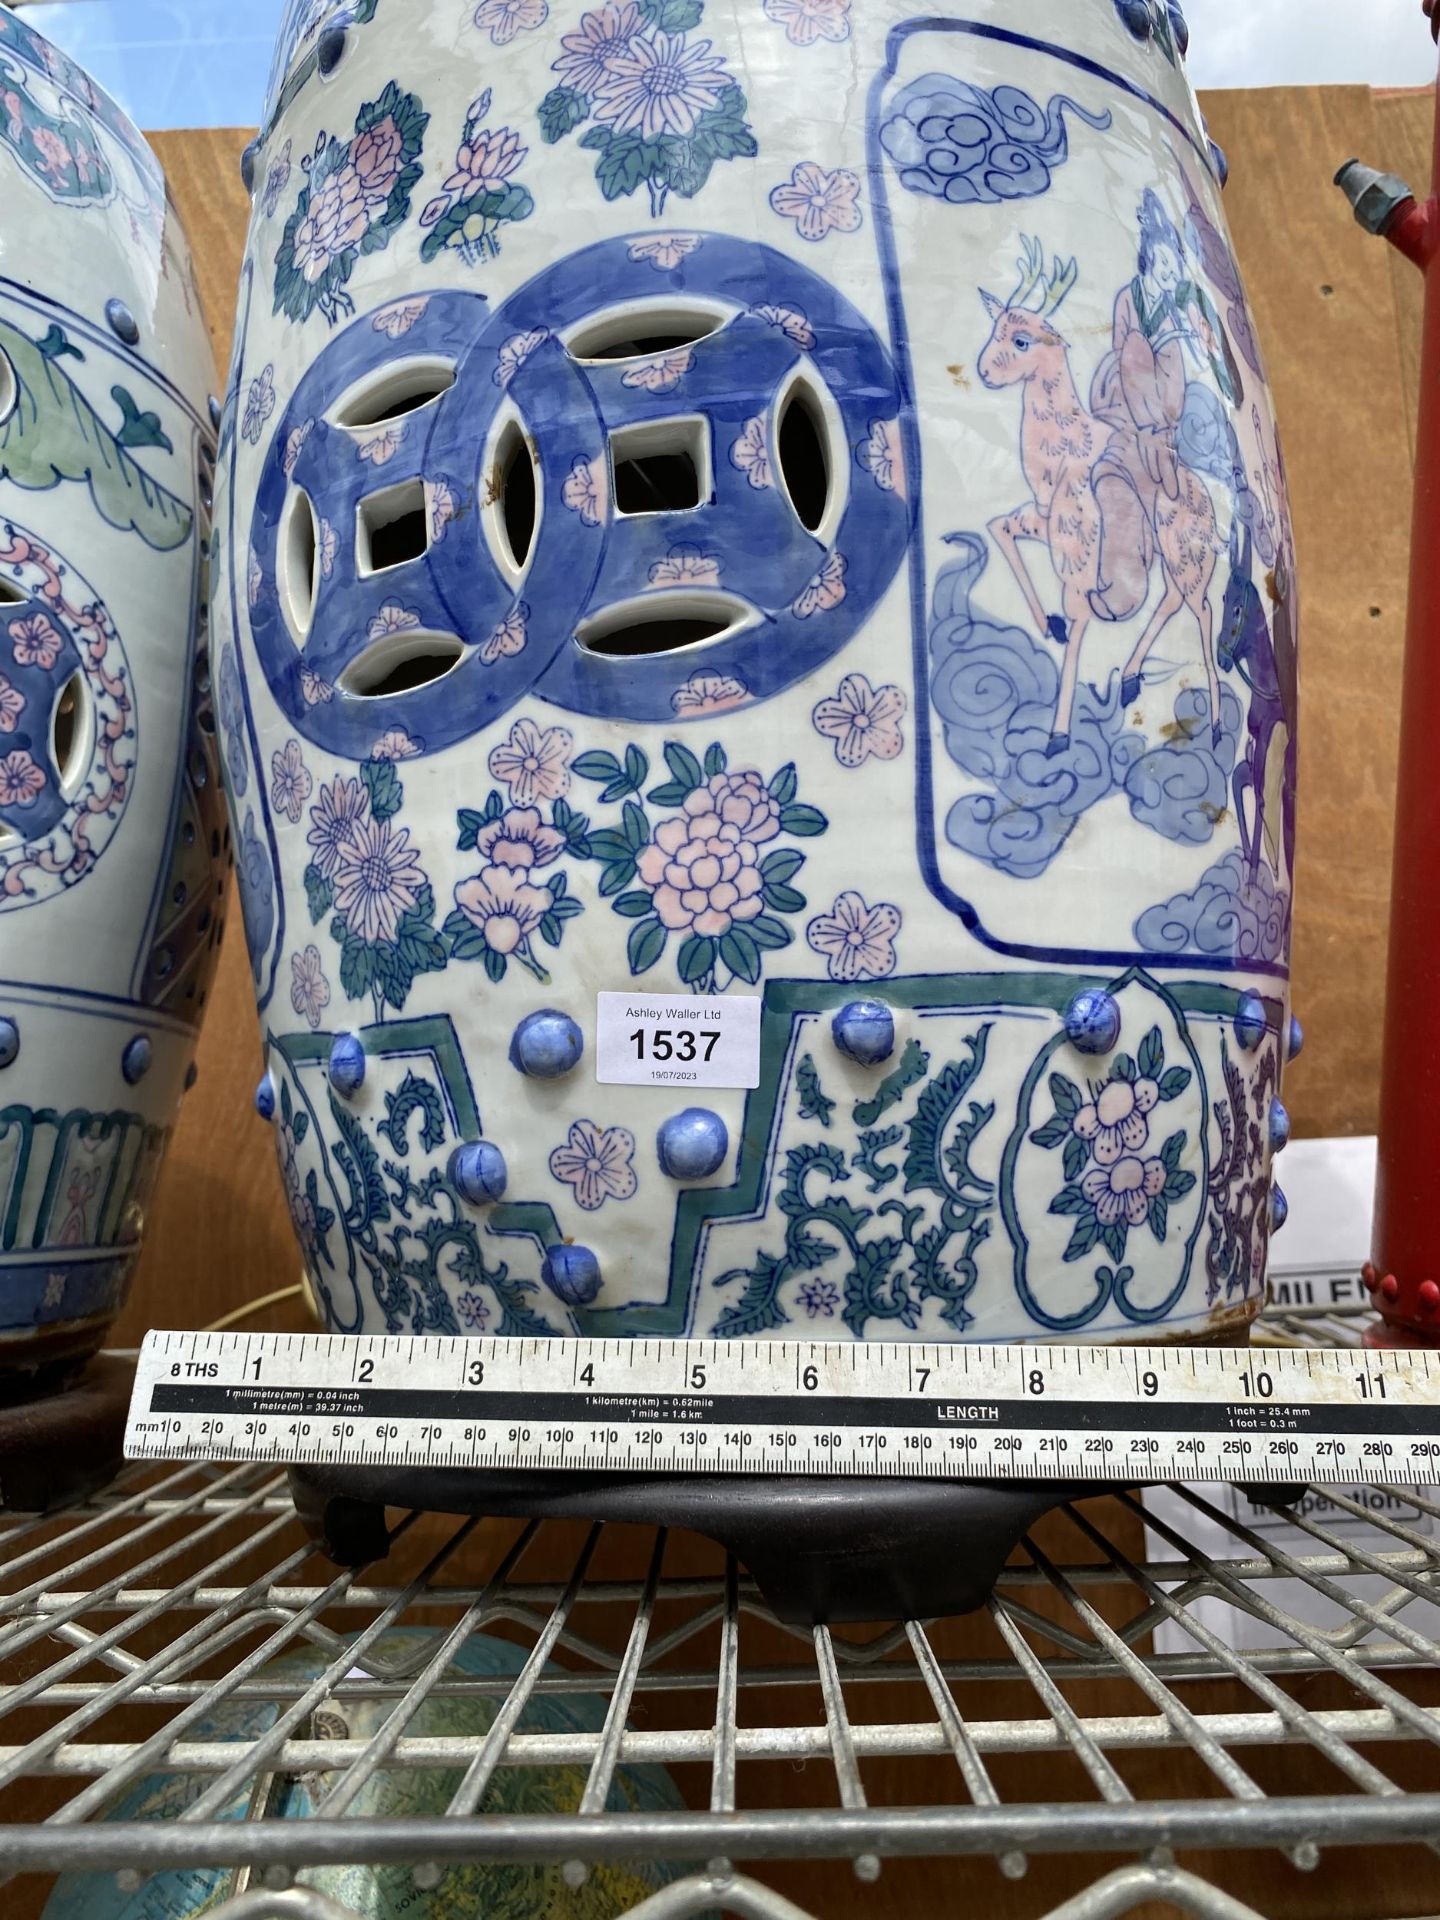 A LARGE ORIENTAL CERAMIC TABLE LAMP WITH WOODEN BASE - Image 6 of 6